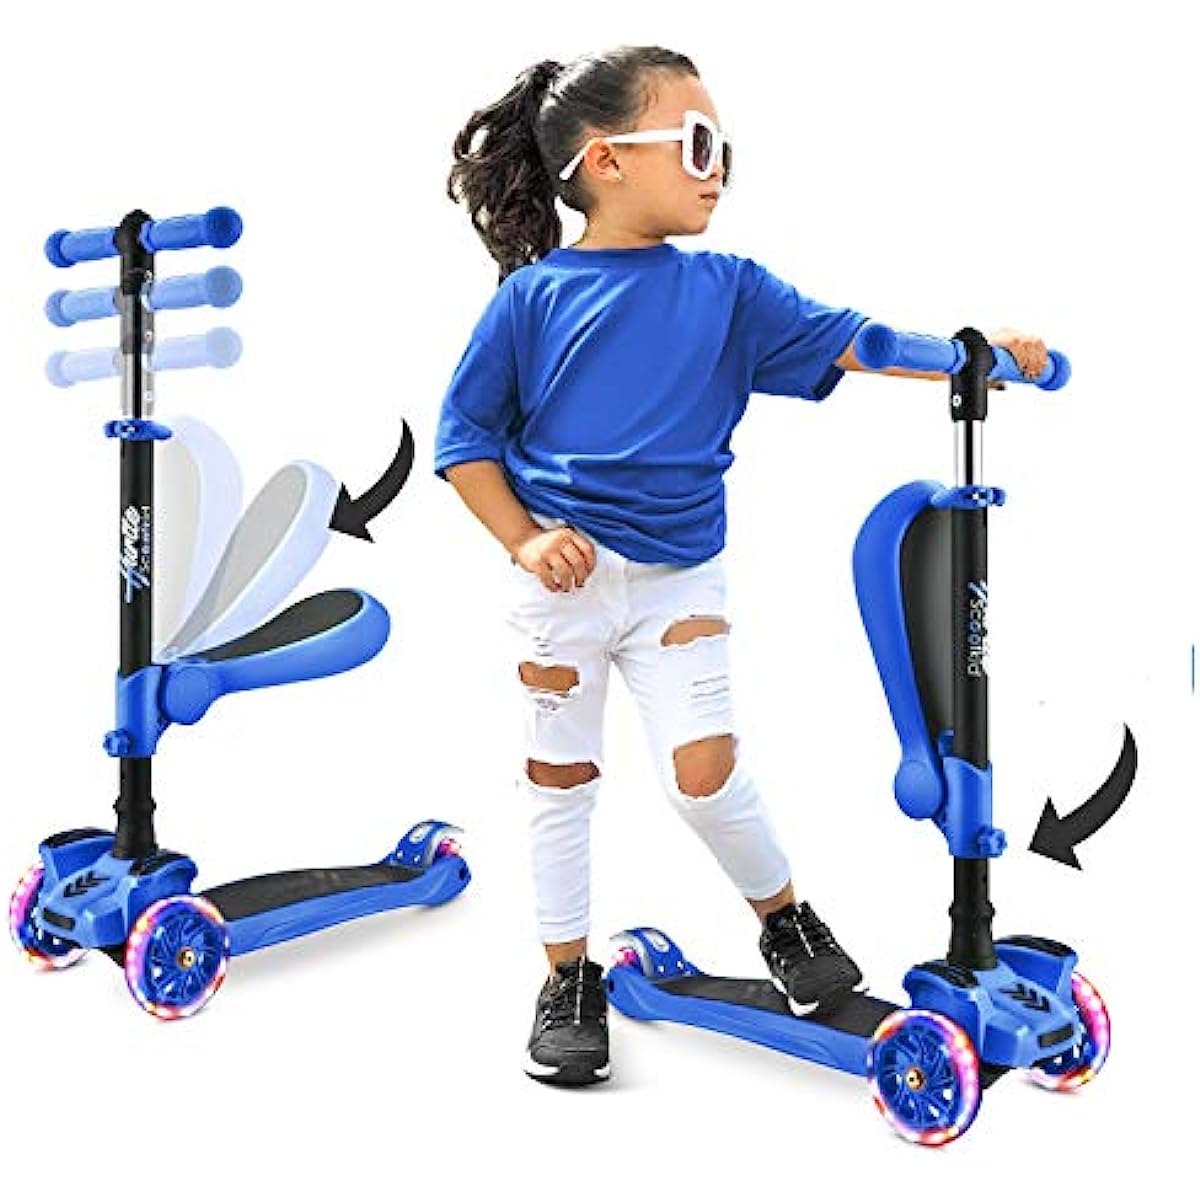 3 Wheeled Scooter for Kids Stand /Toddlers Toy Folding Kick Scooters w/Adjustable Height Anti-Slip Deck Flashing Wheel Lights for Boys/Girls 2-12 Year Old Hurtle